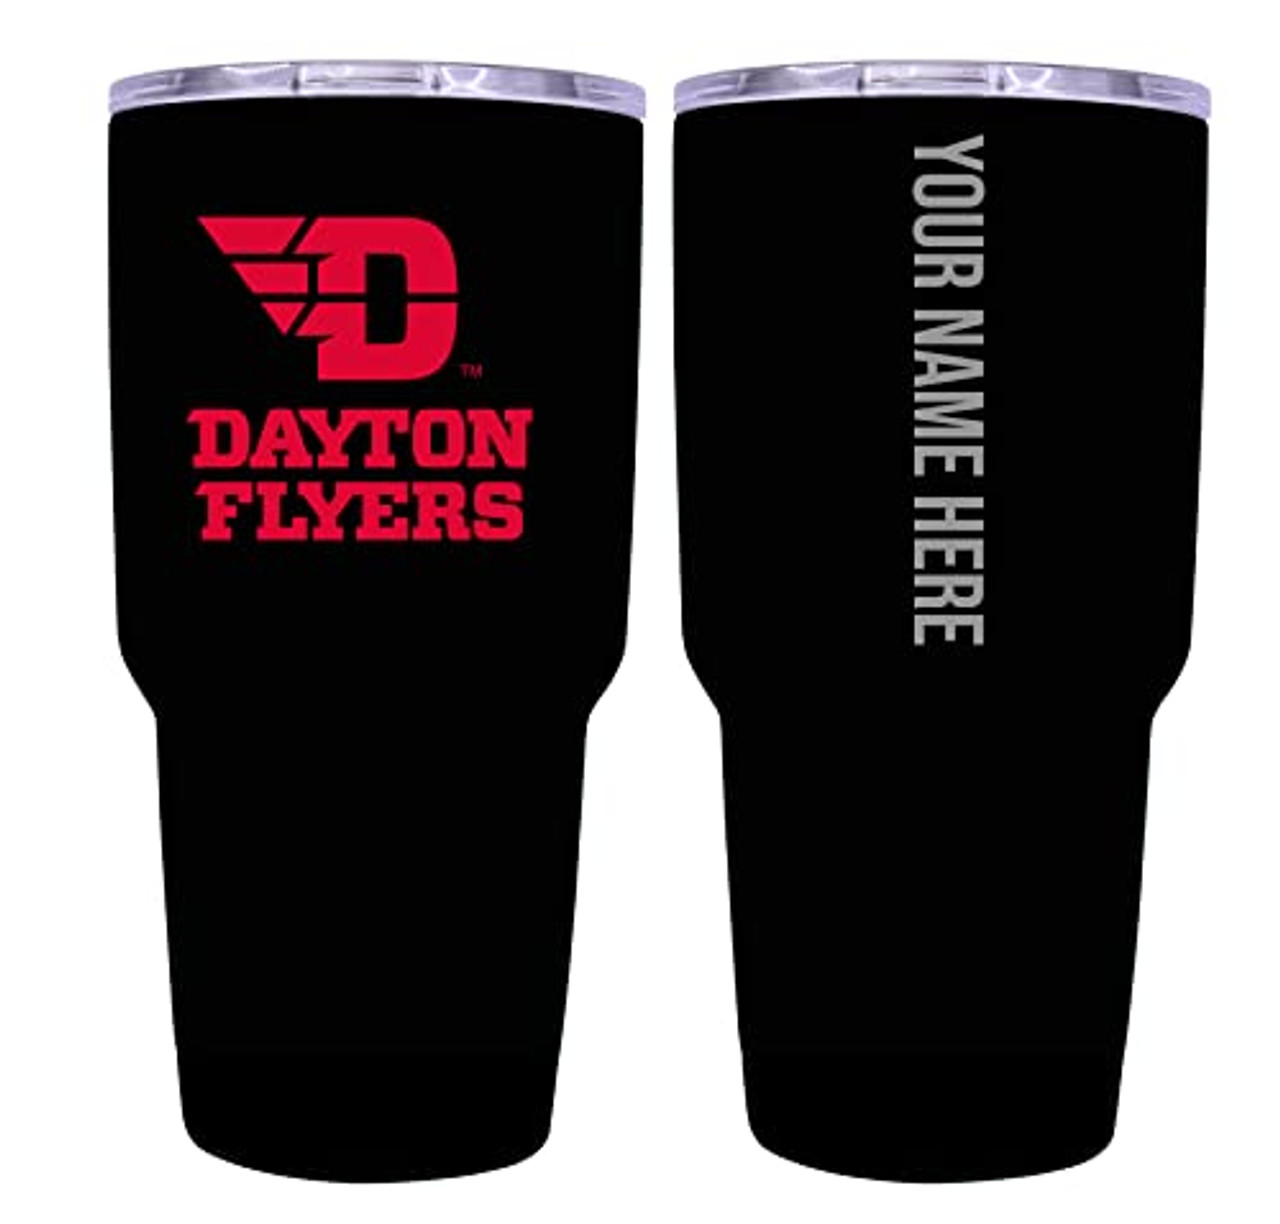 Collegiate Custom Personalized Dayton Flyers, 24 oz Insulated Stainless Steel Tumbler with Engraved Name (Black)